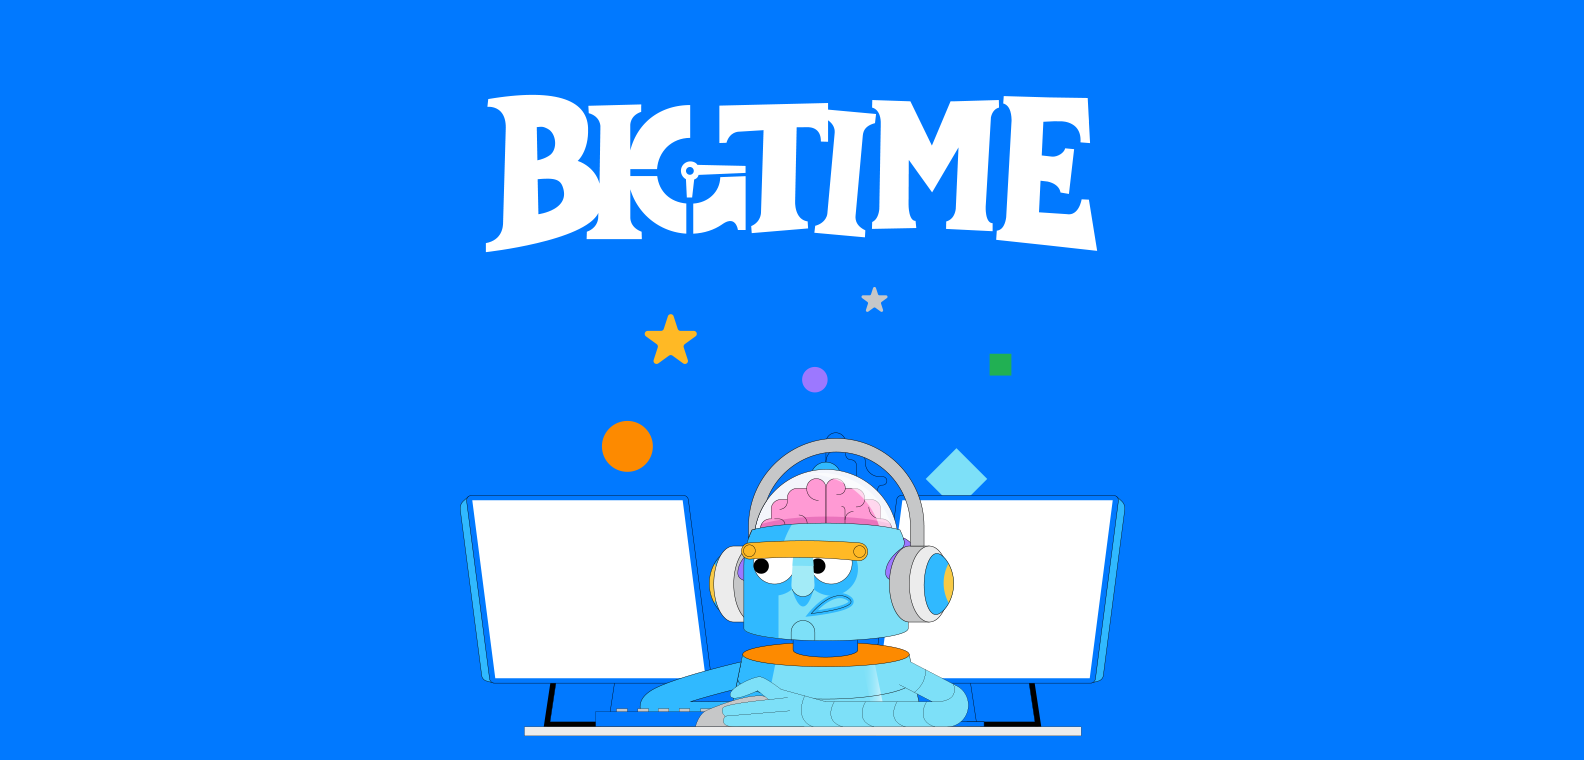 Big Time SPACE Rarity & Utility Explained, by Big Time, PlayBigTime